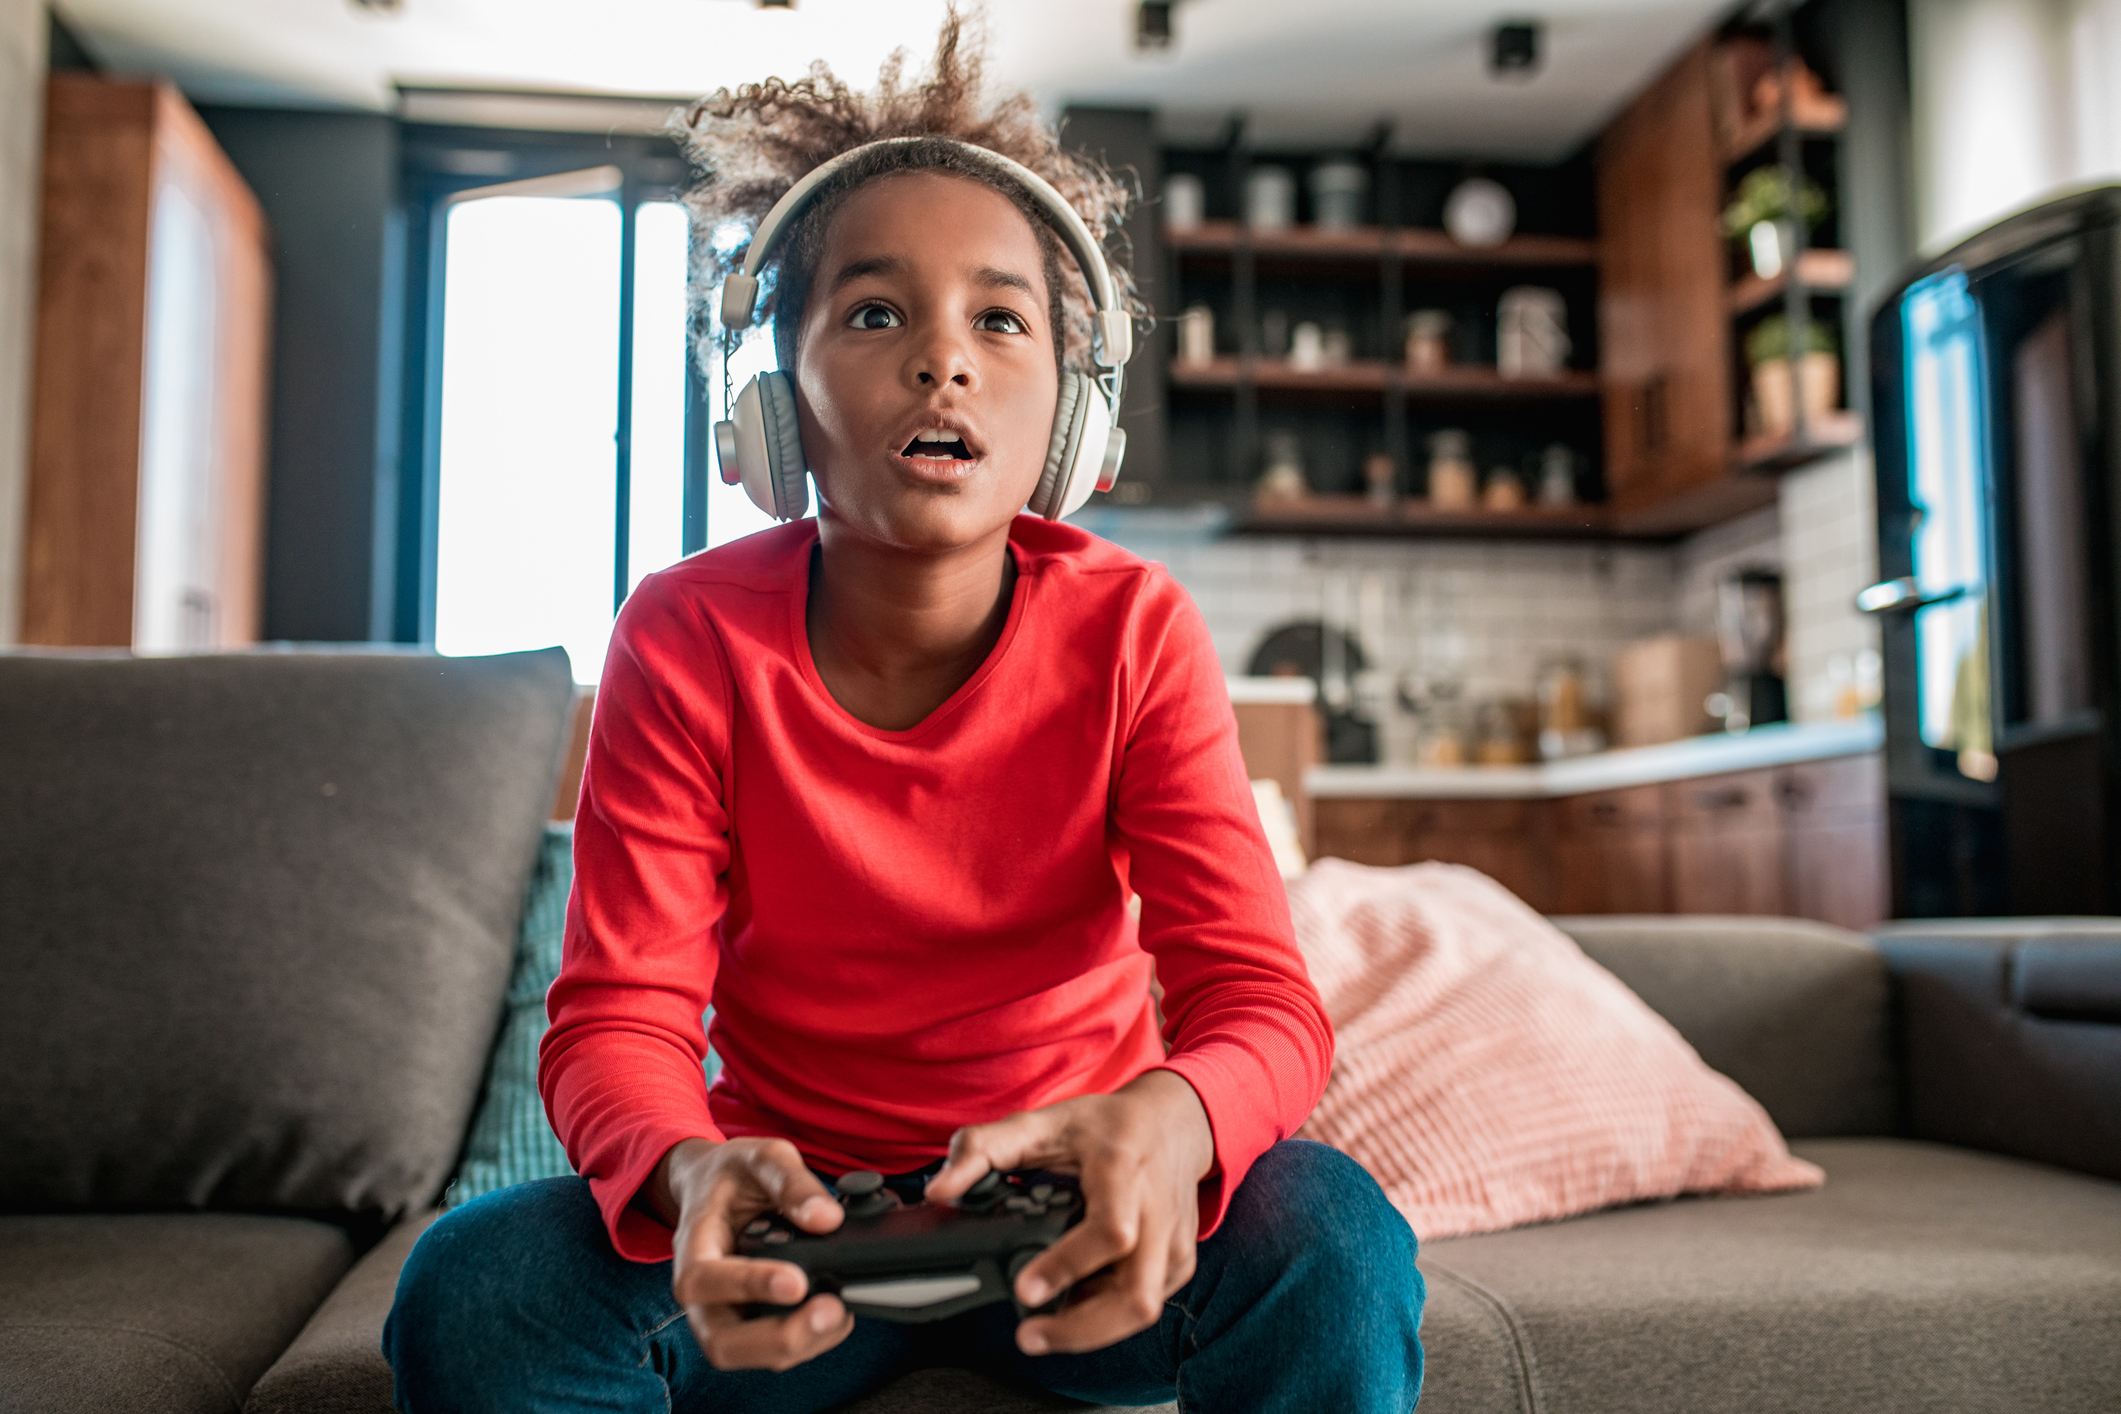 How Long Should a 10-year-old Play Video Games Per Day?